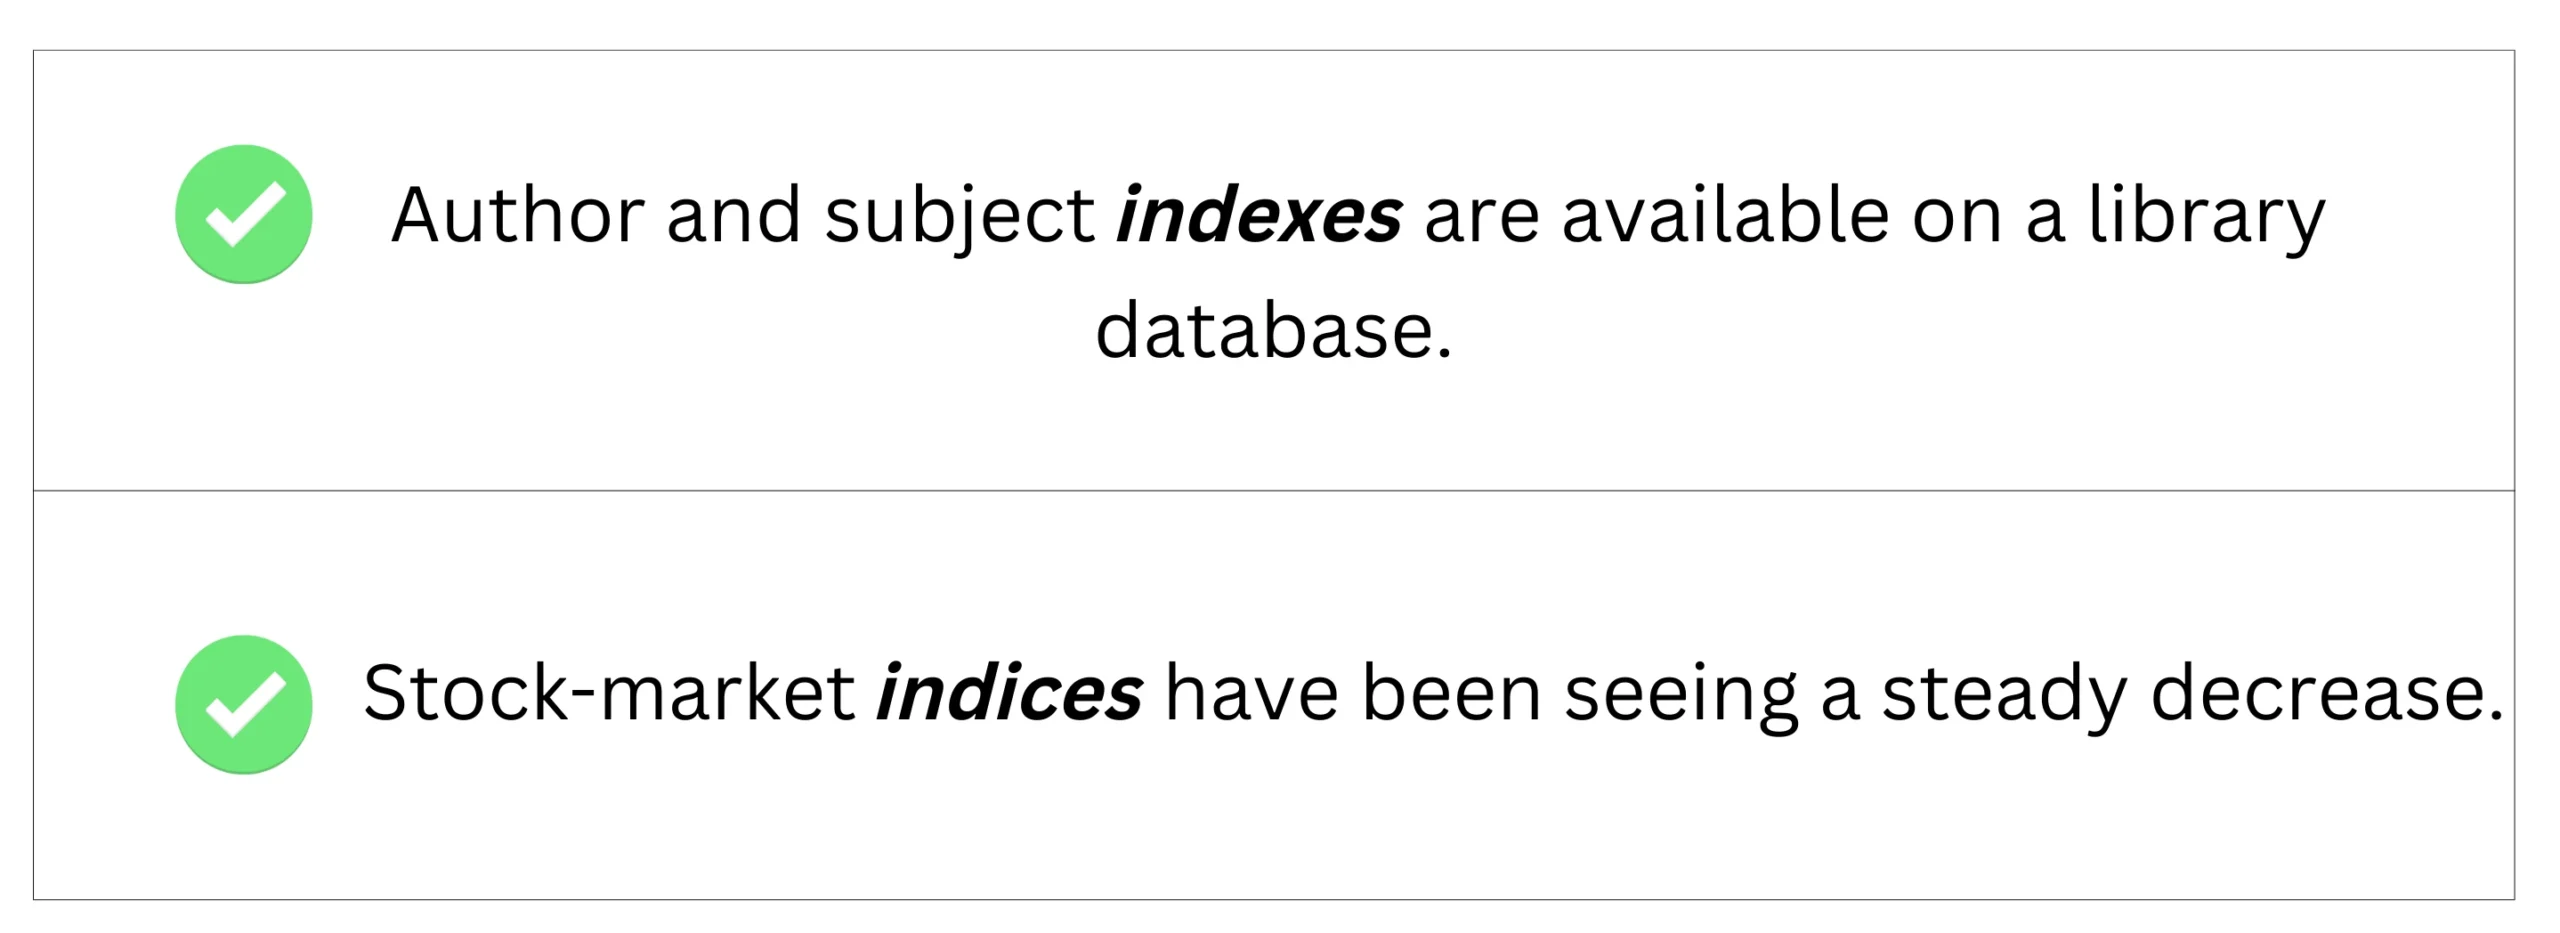 Indices/indexes in sentences.